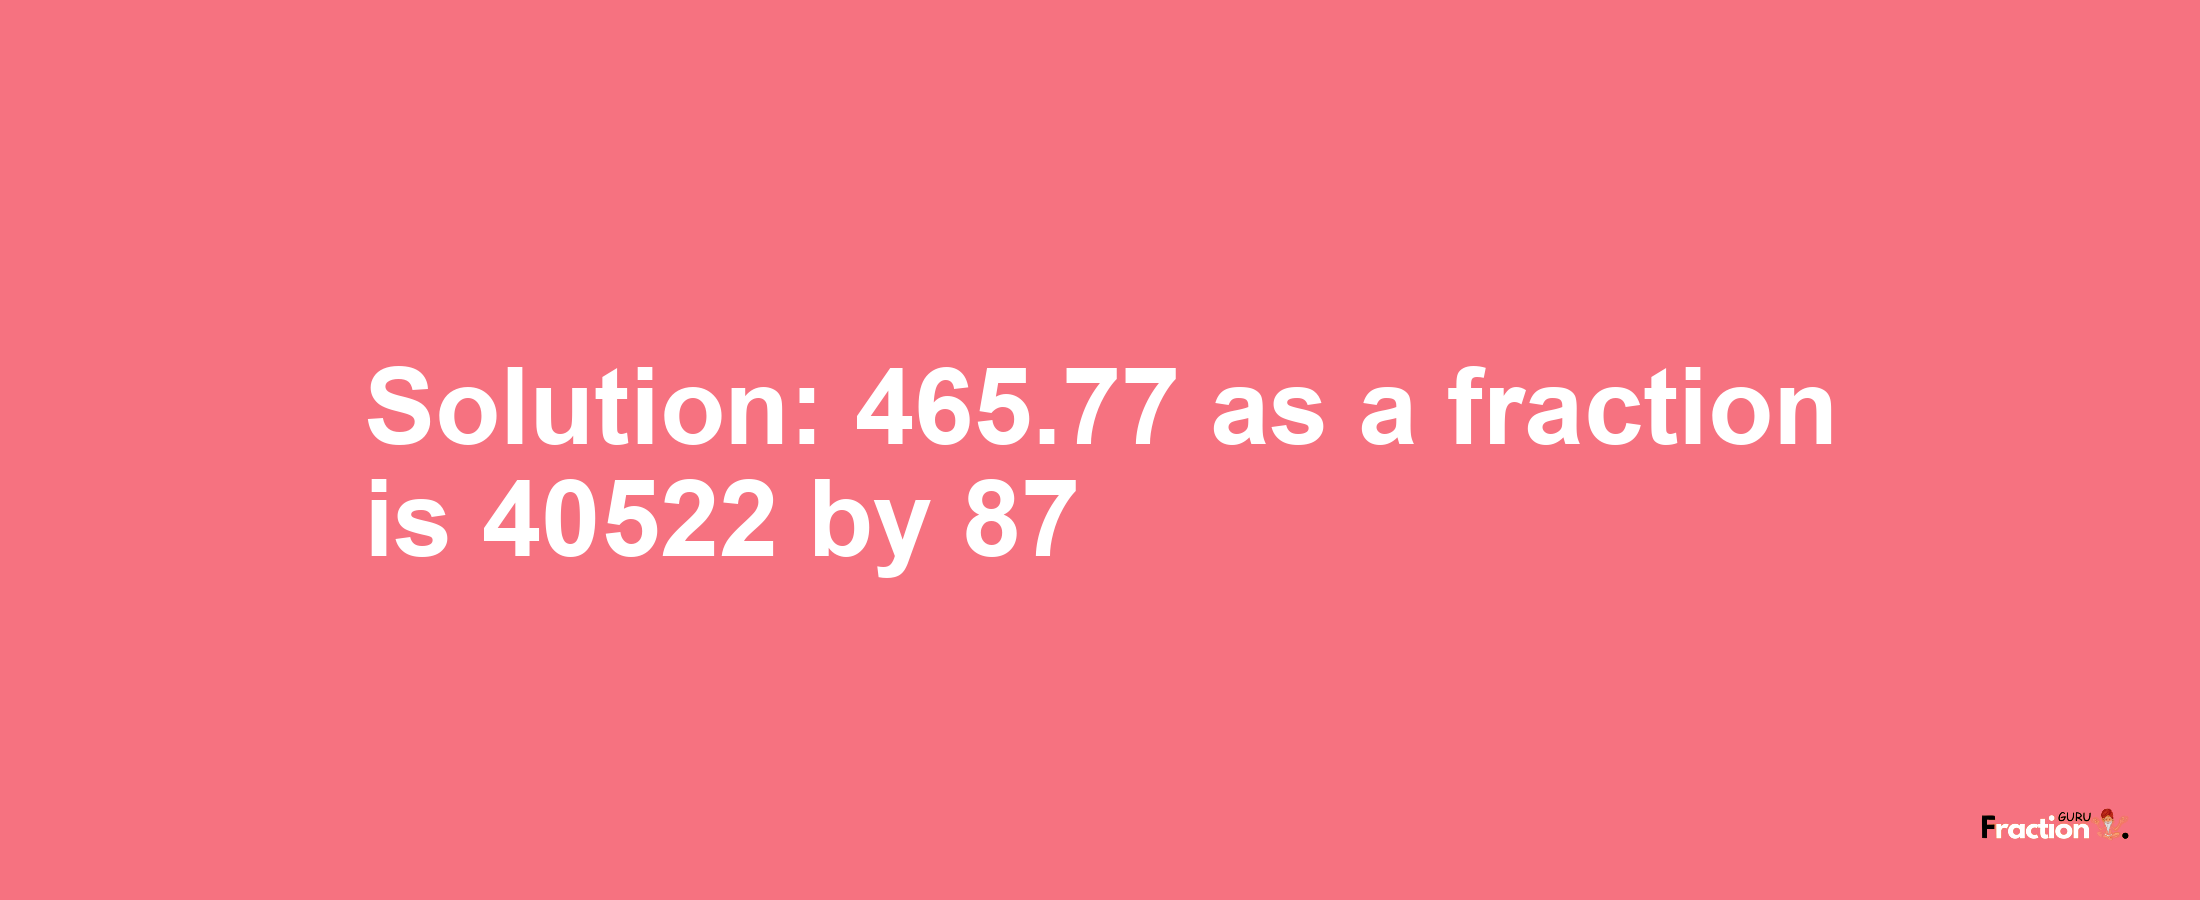 Solution:465.77 as a fraction is 40522/87